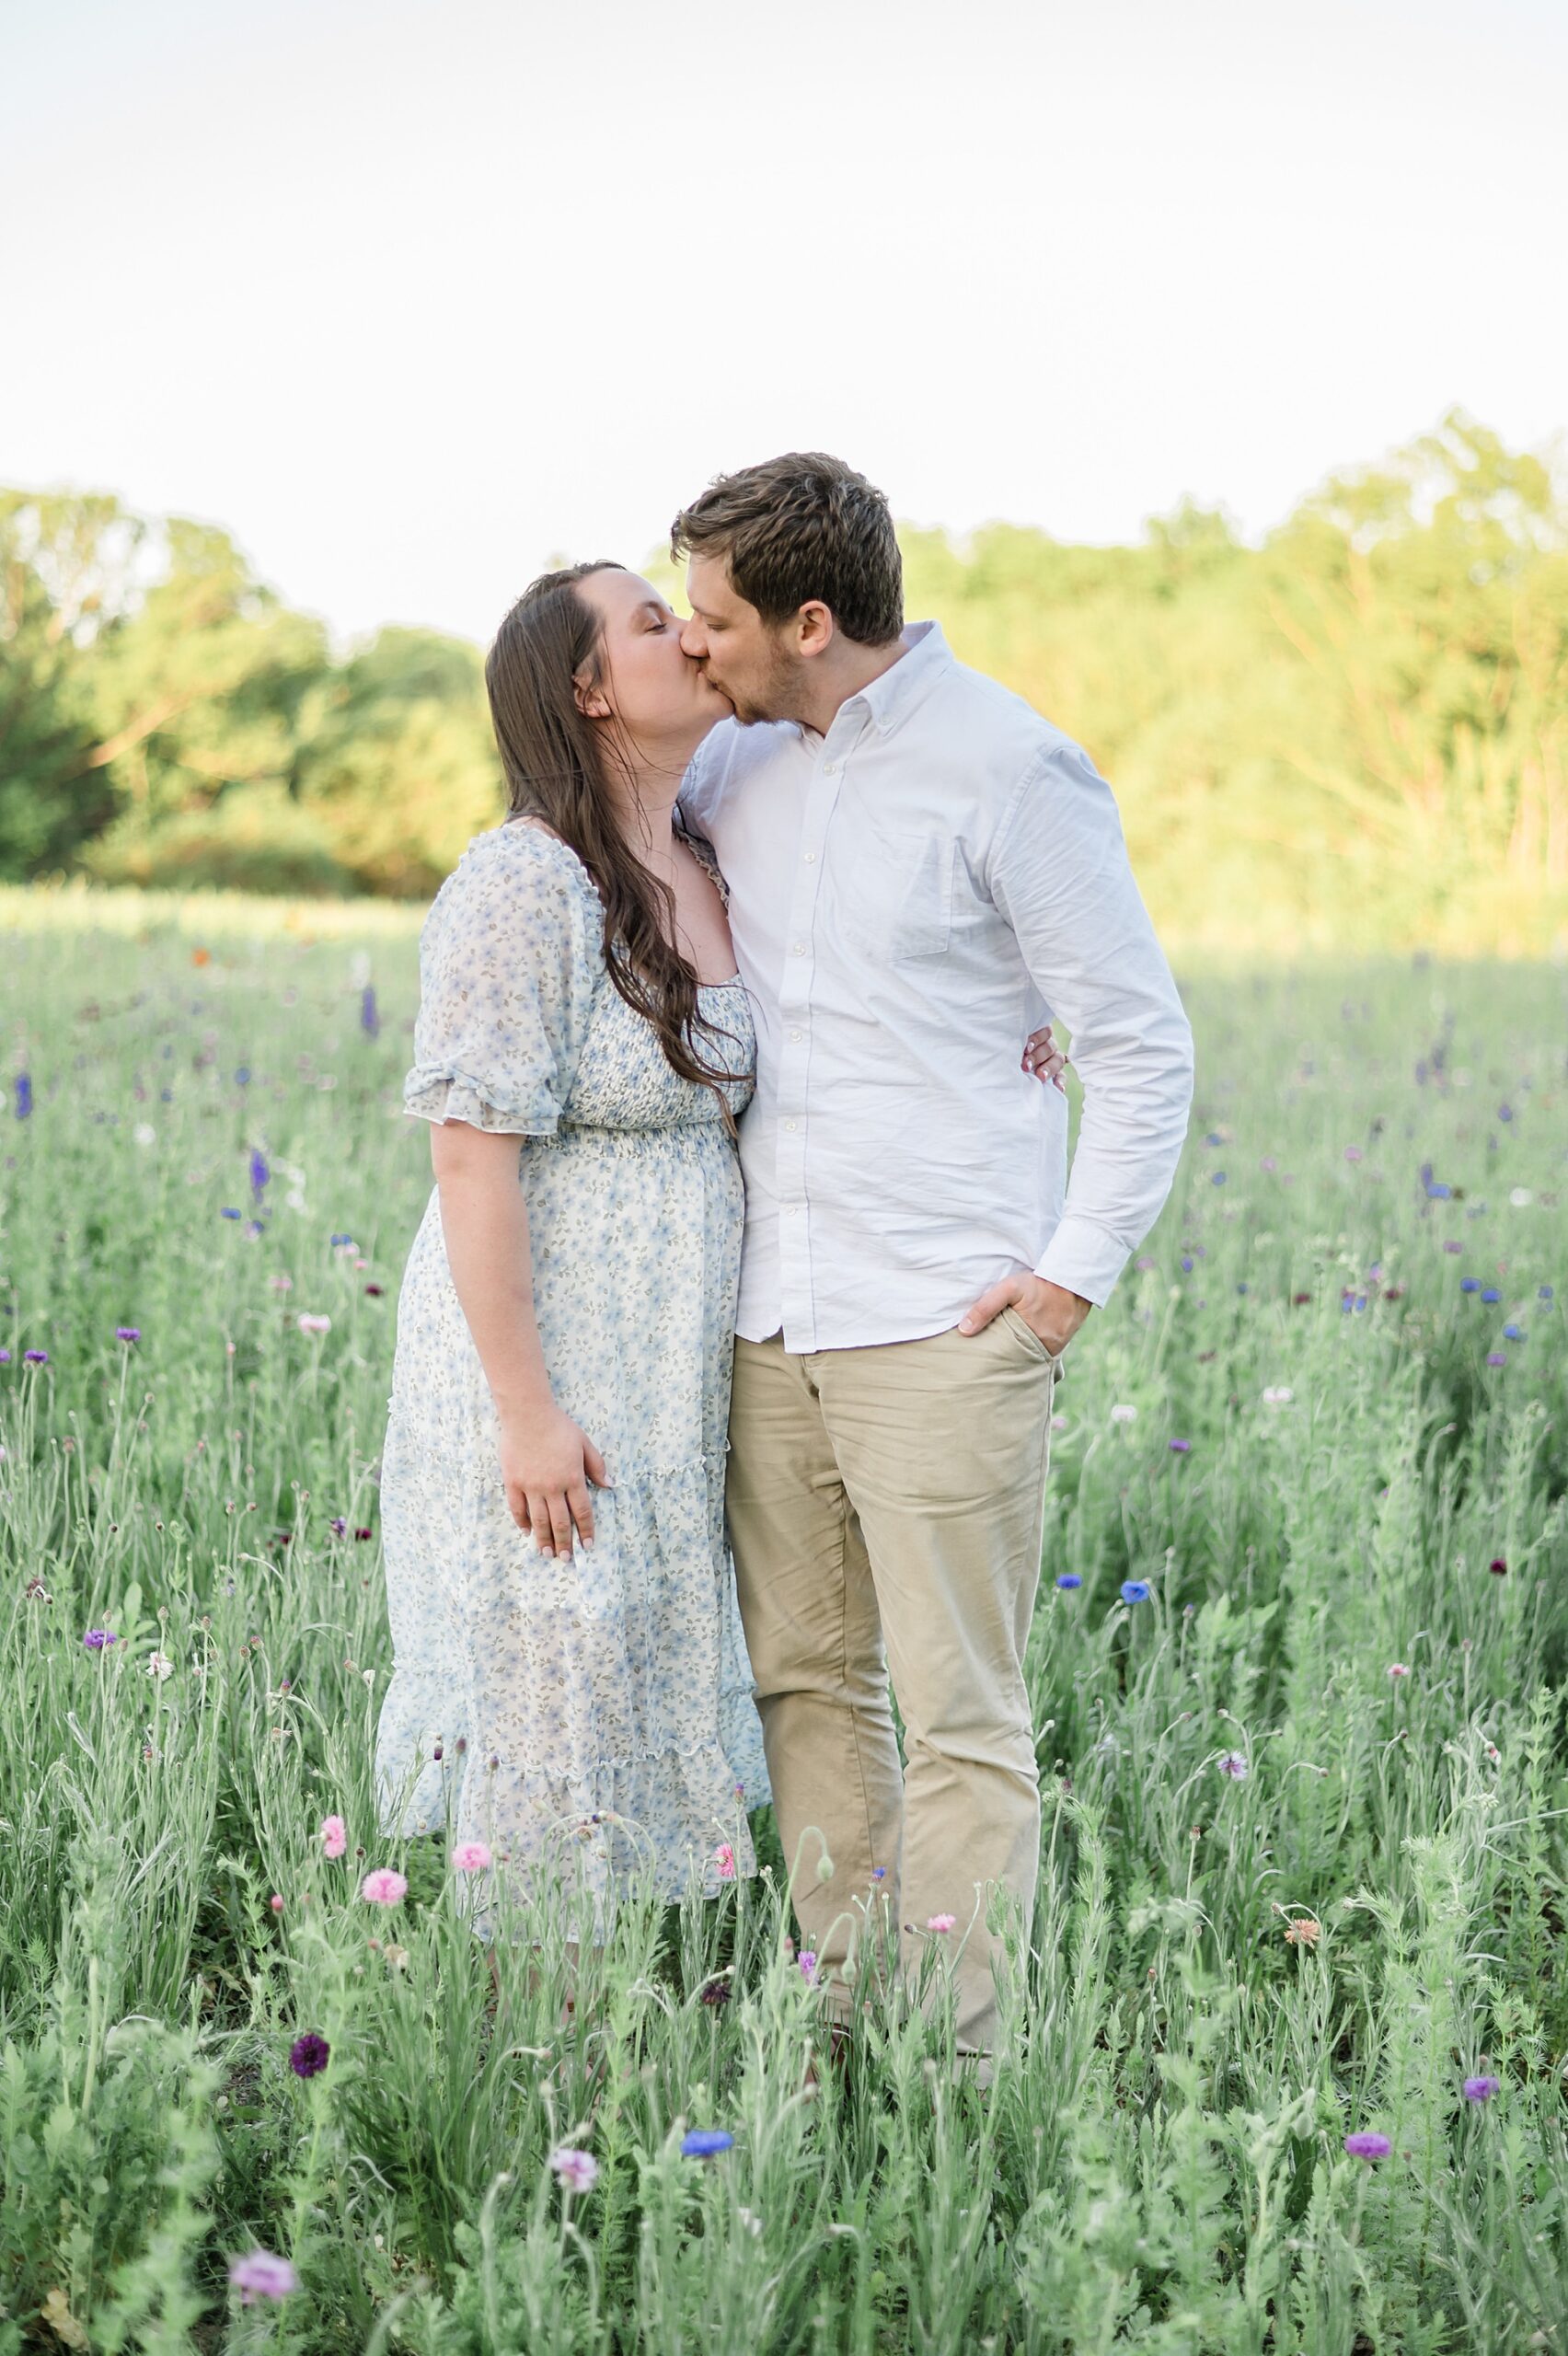 couple portraits from family session in Texas taken by Lindsey Dutton Photography, a Dallas family photographer